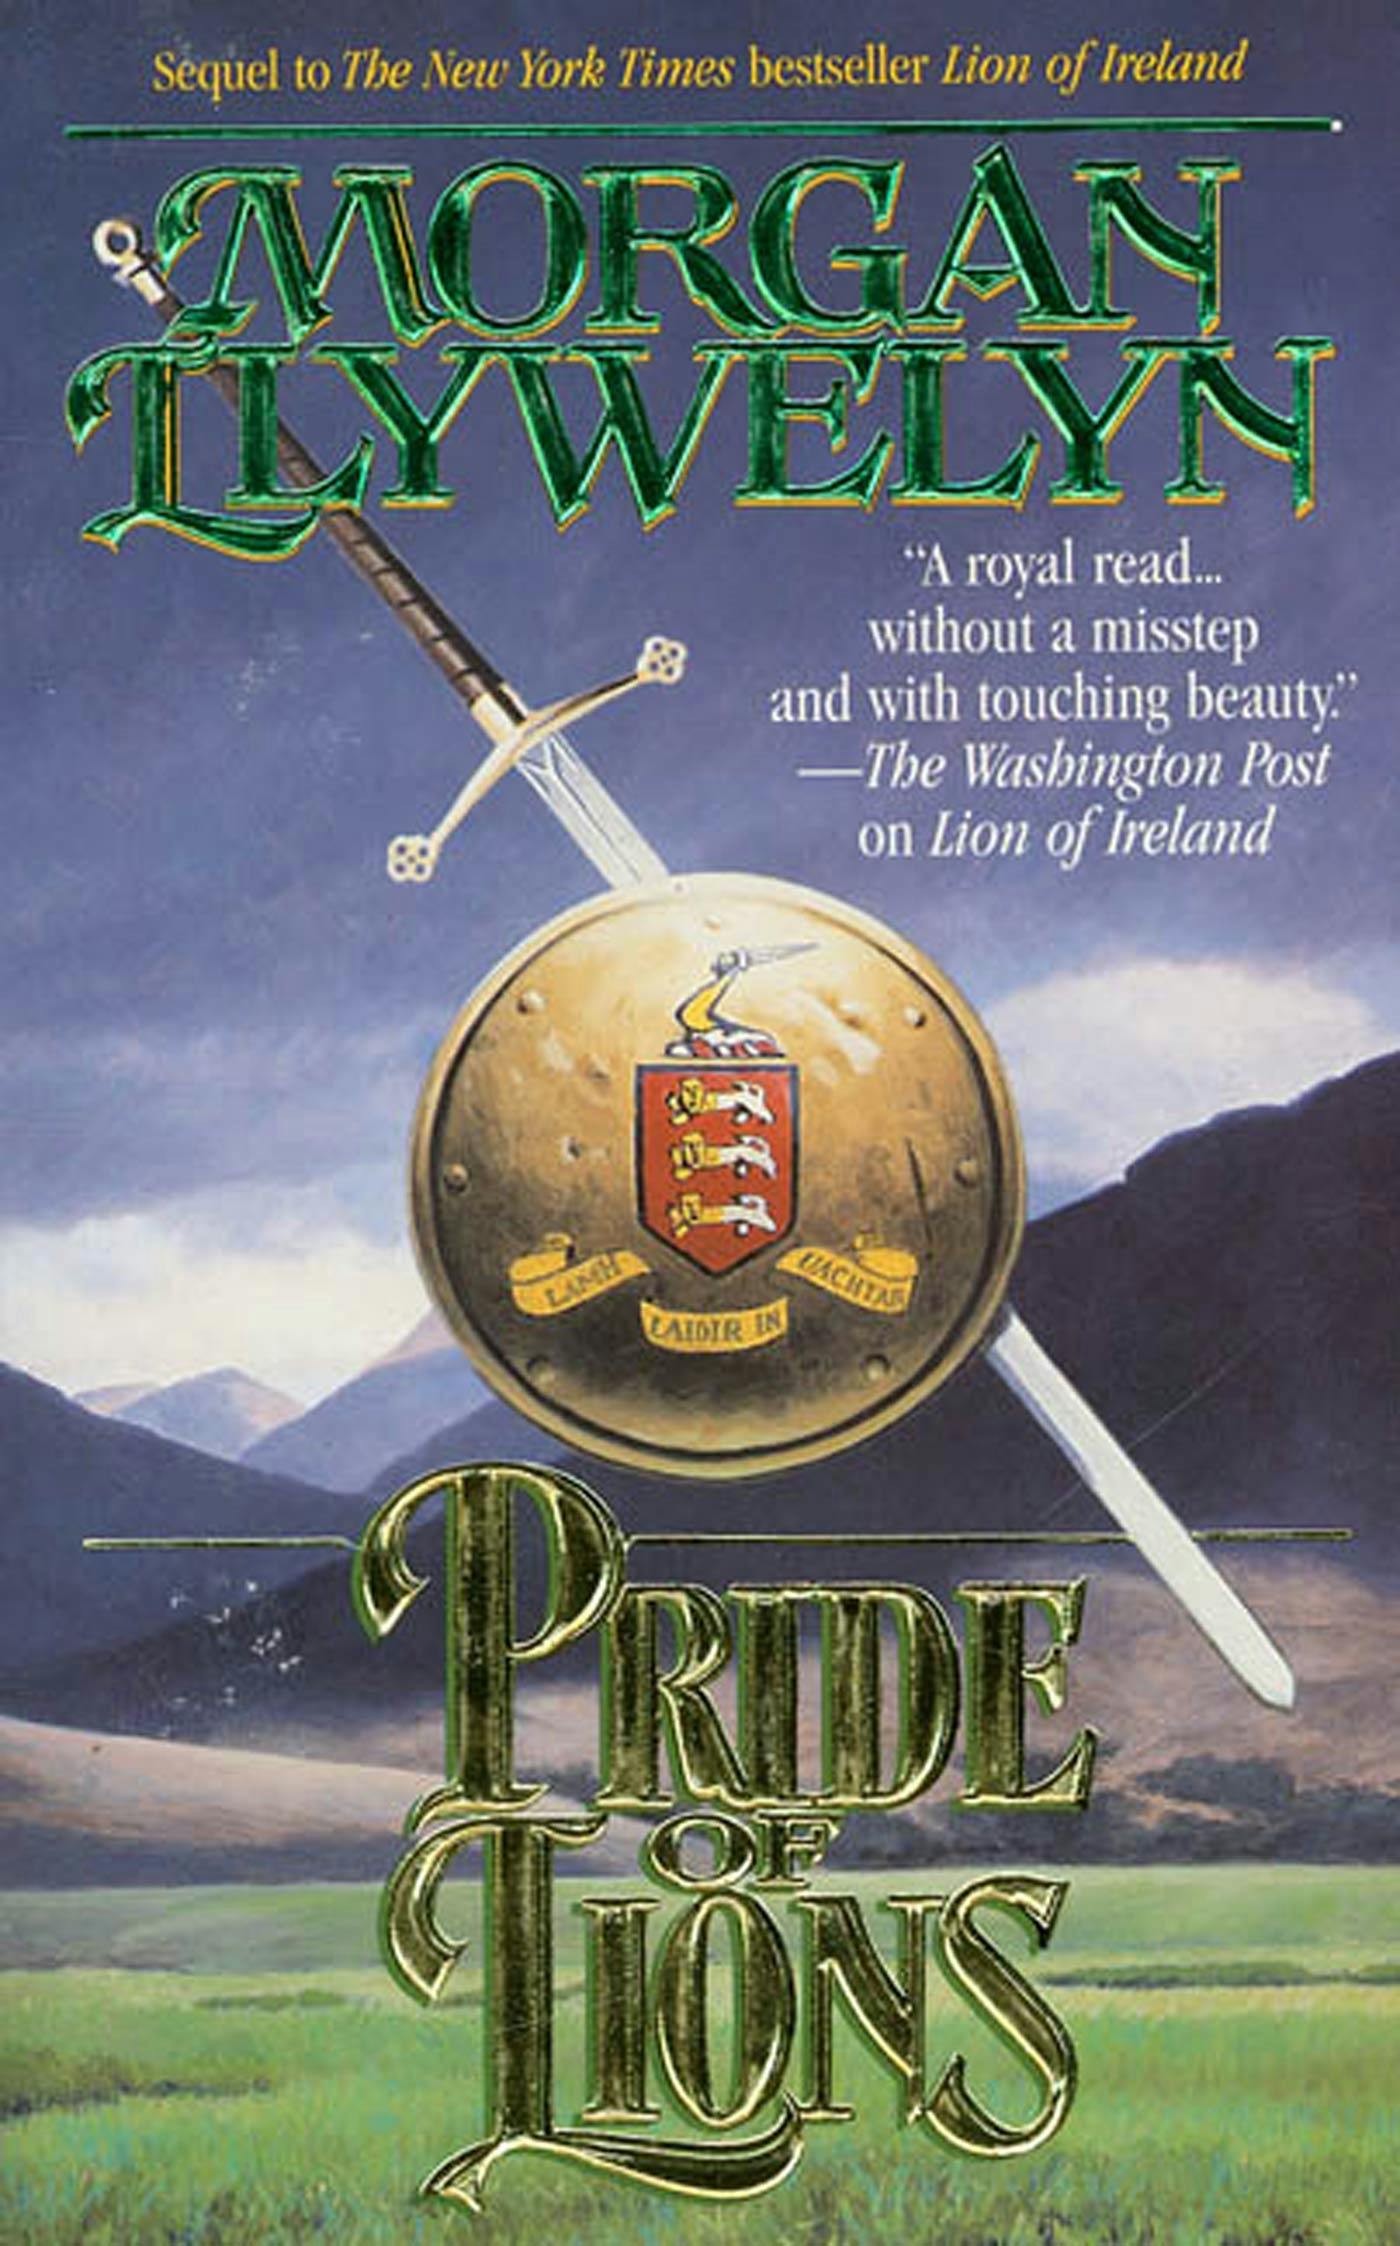 Cover for the book titled as: Pride of Lions